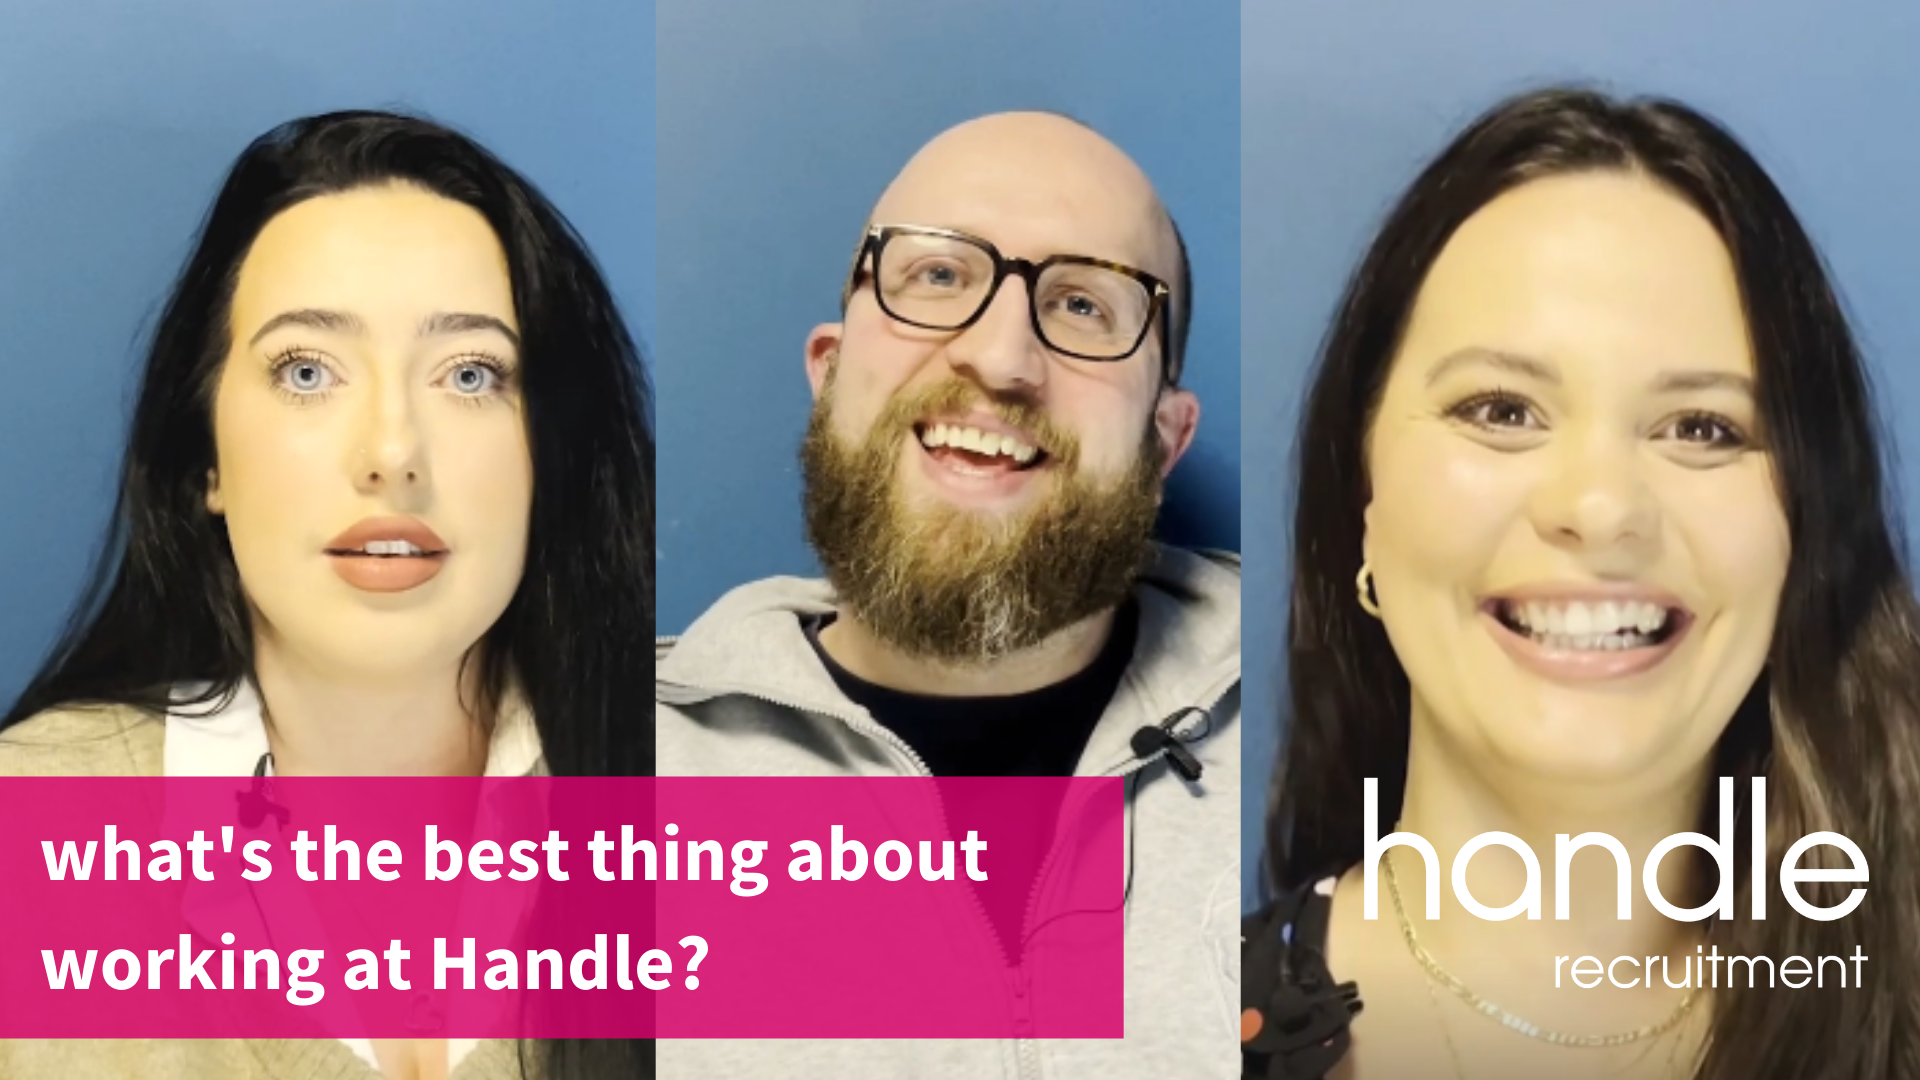 What's the best thing about working at Handle?